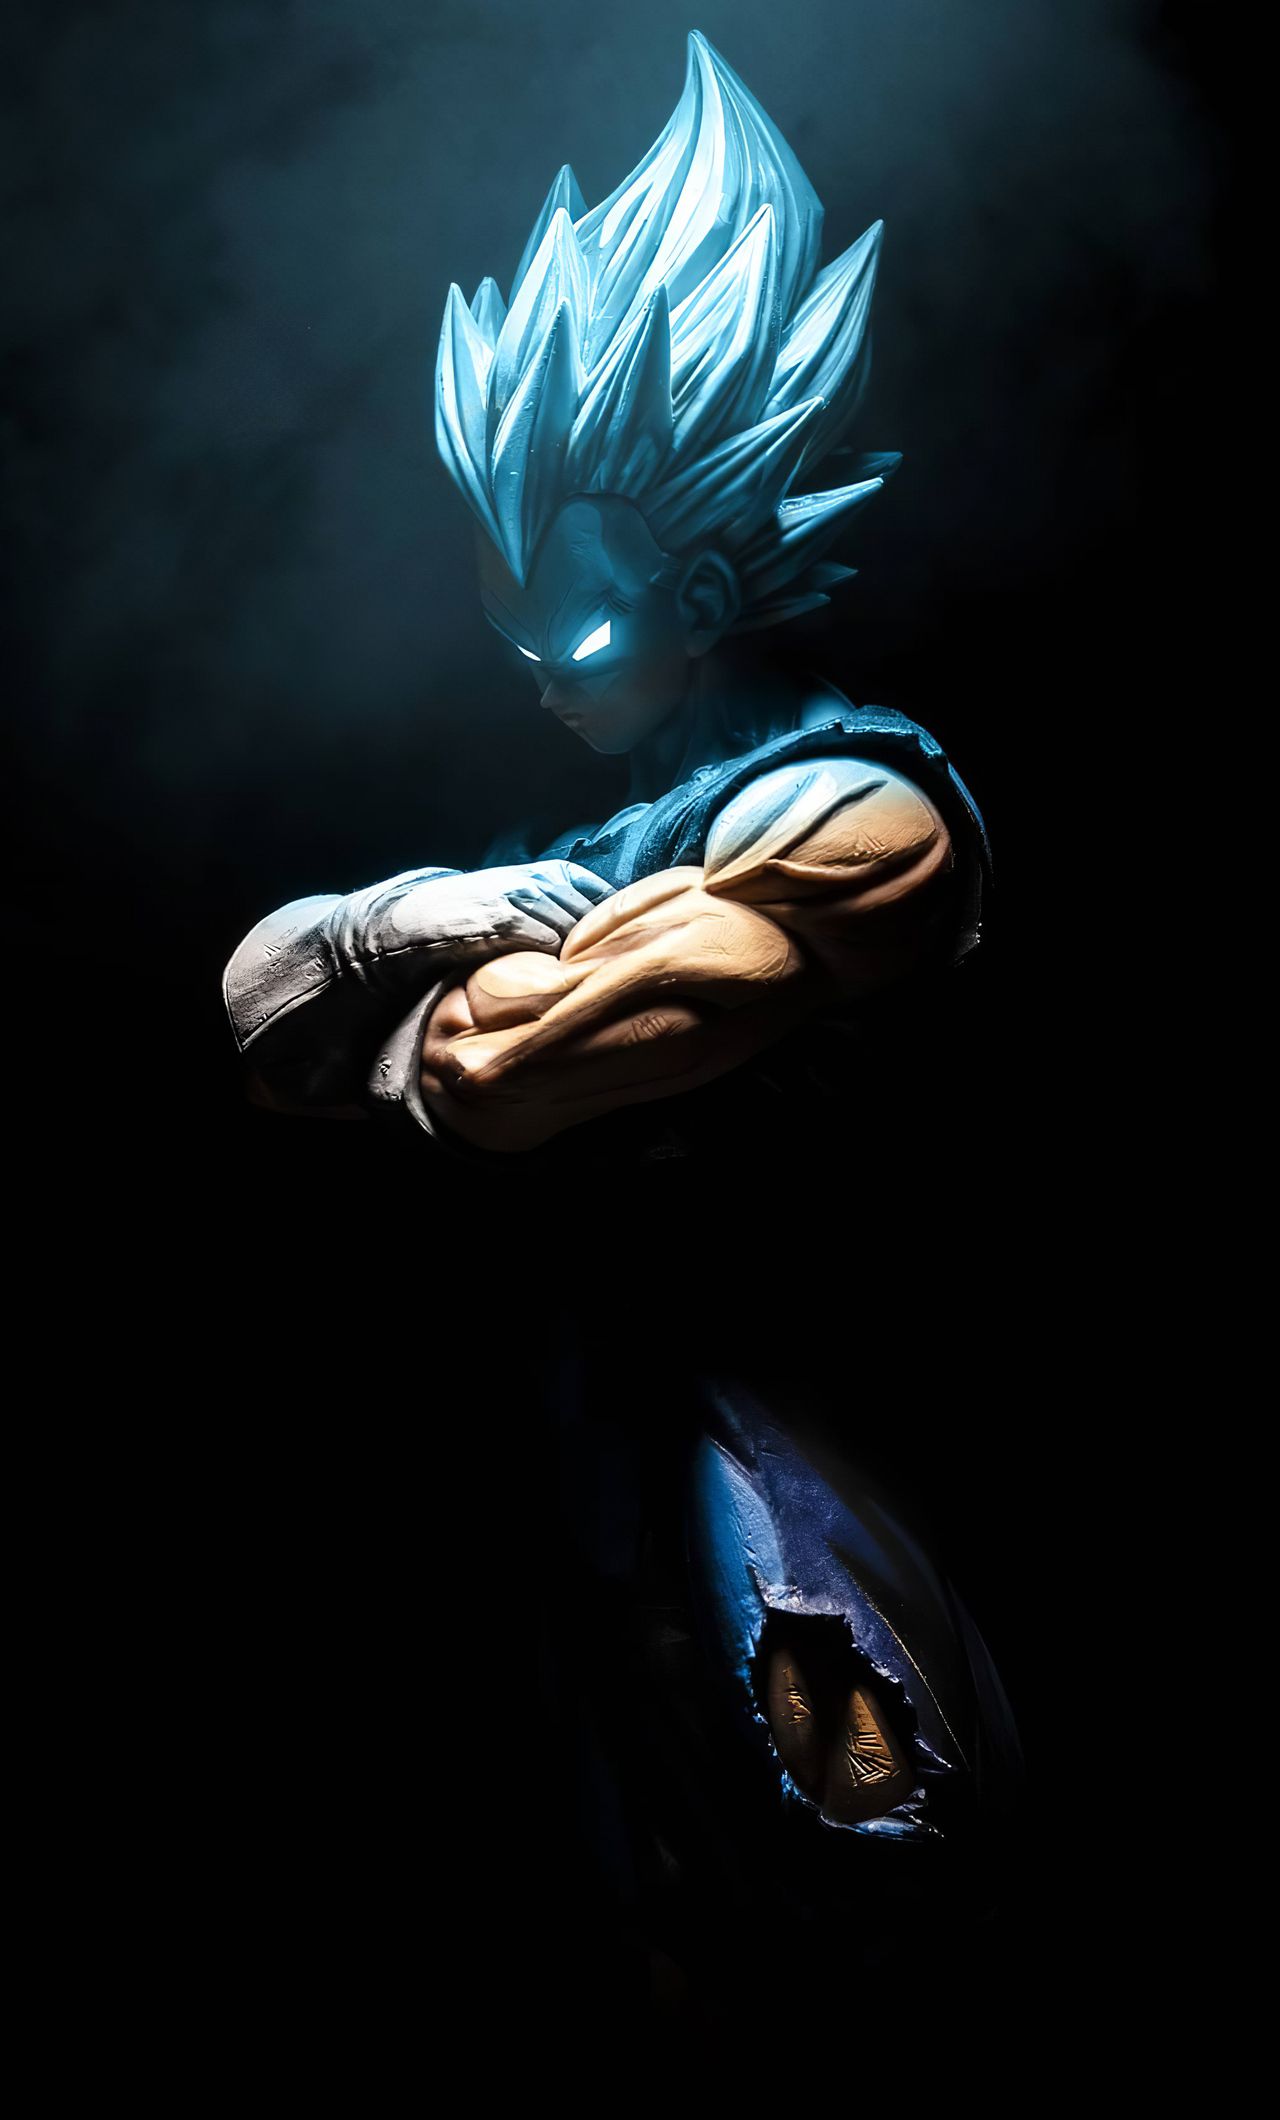 1280x2120 2020 Goku 4k iPhone 6+ HD 4k Wallpapers, Image, Backgrounds, Photos and Pictures